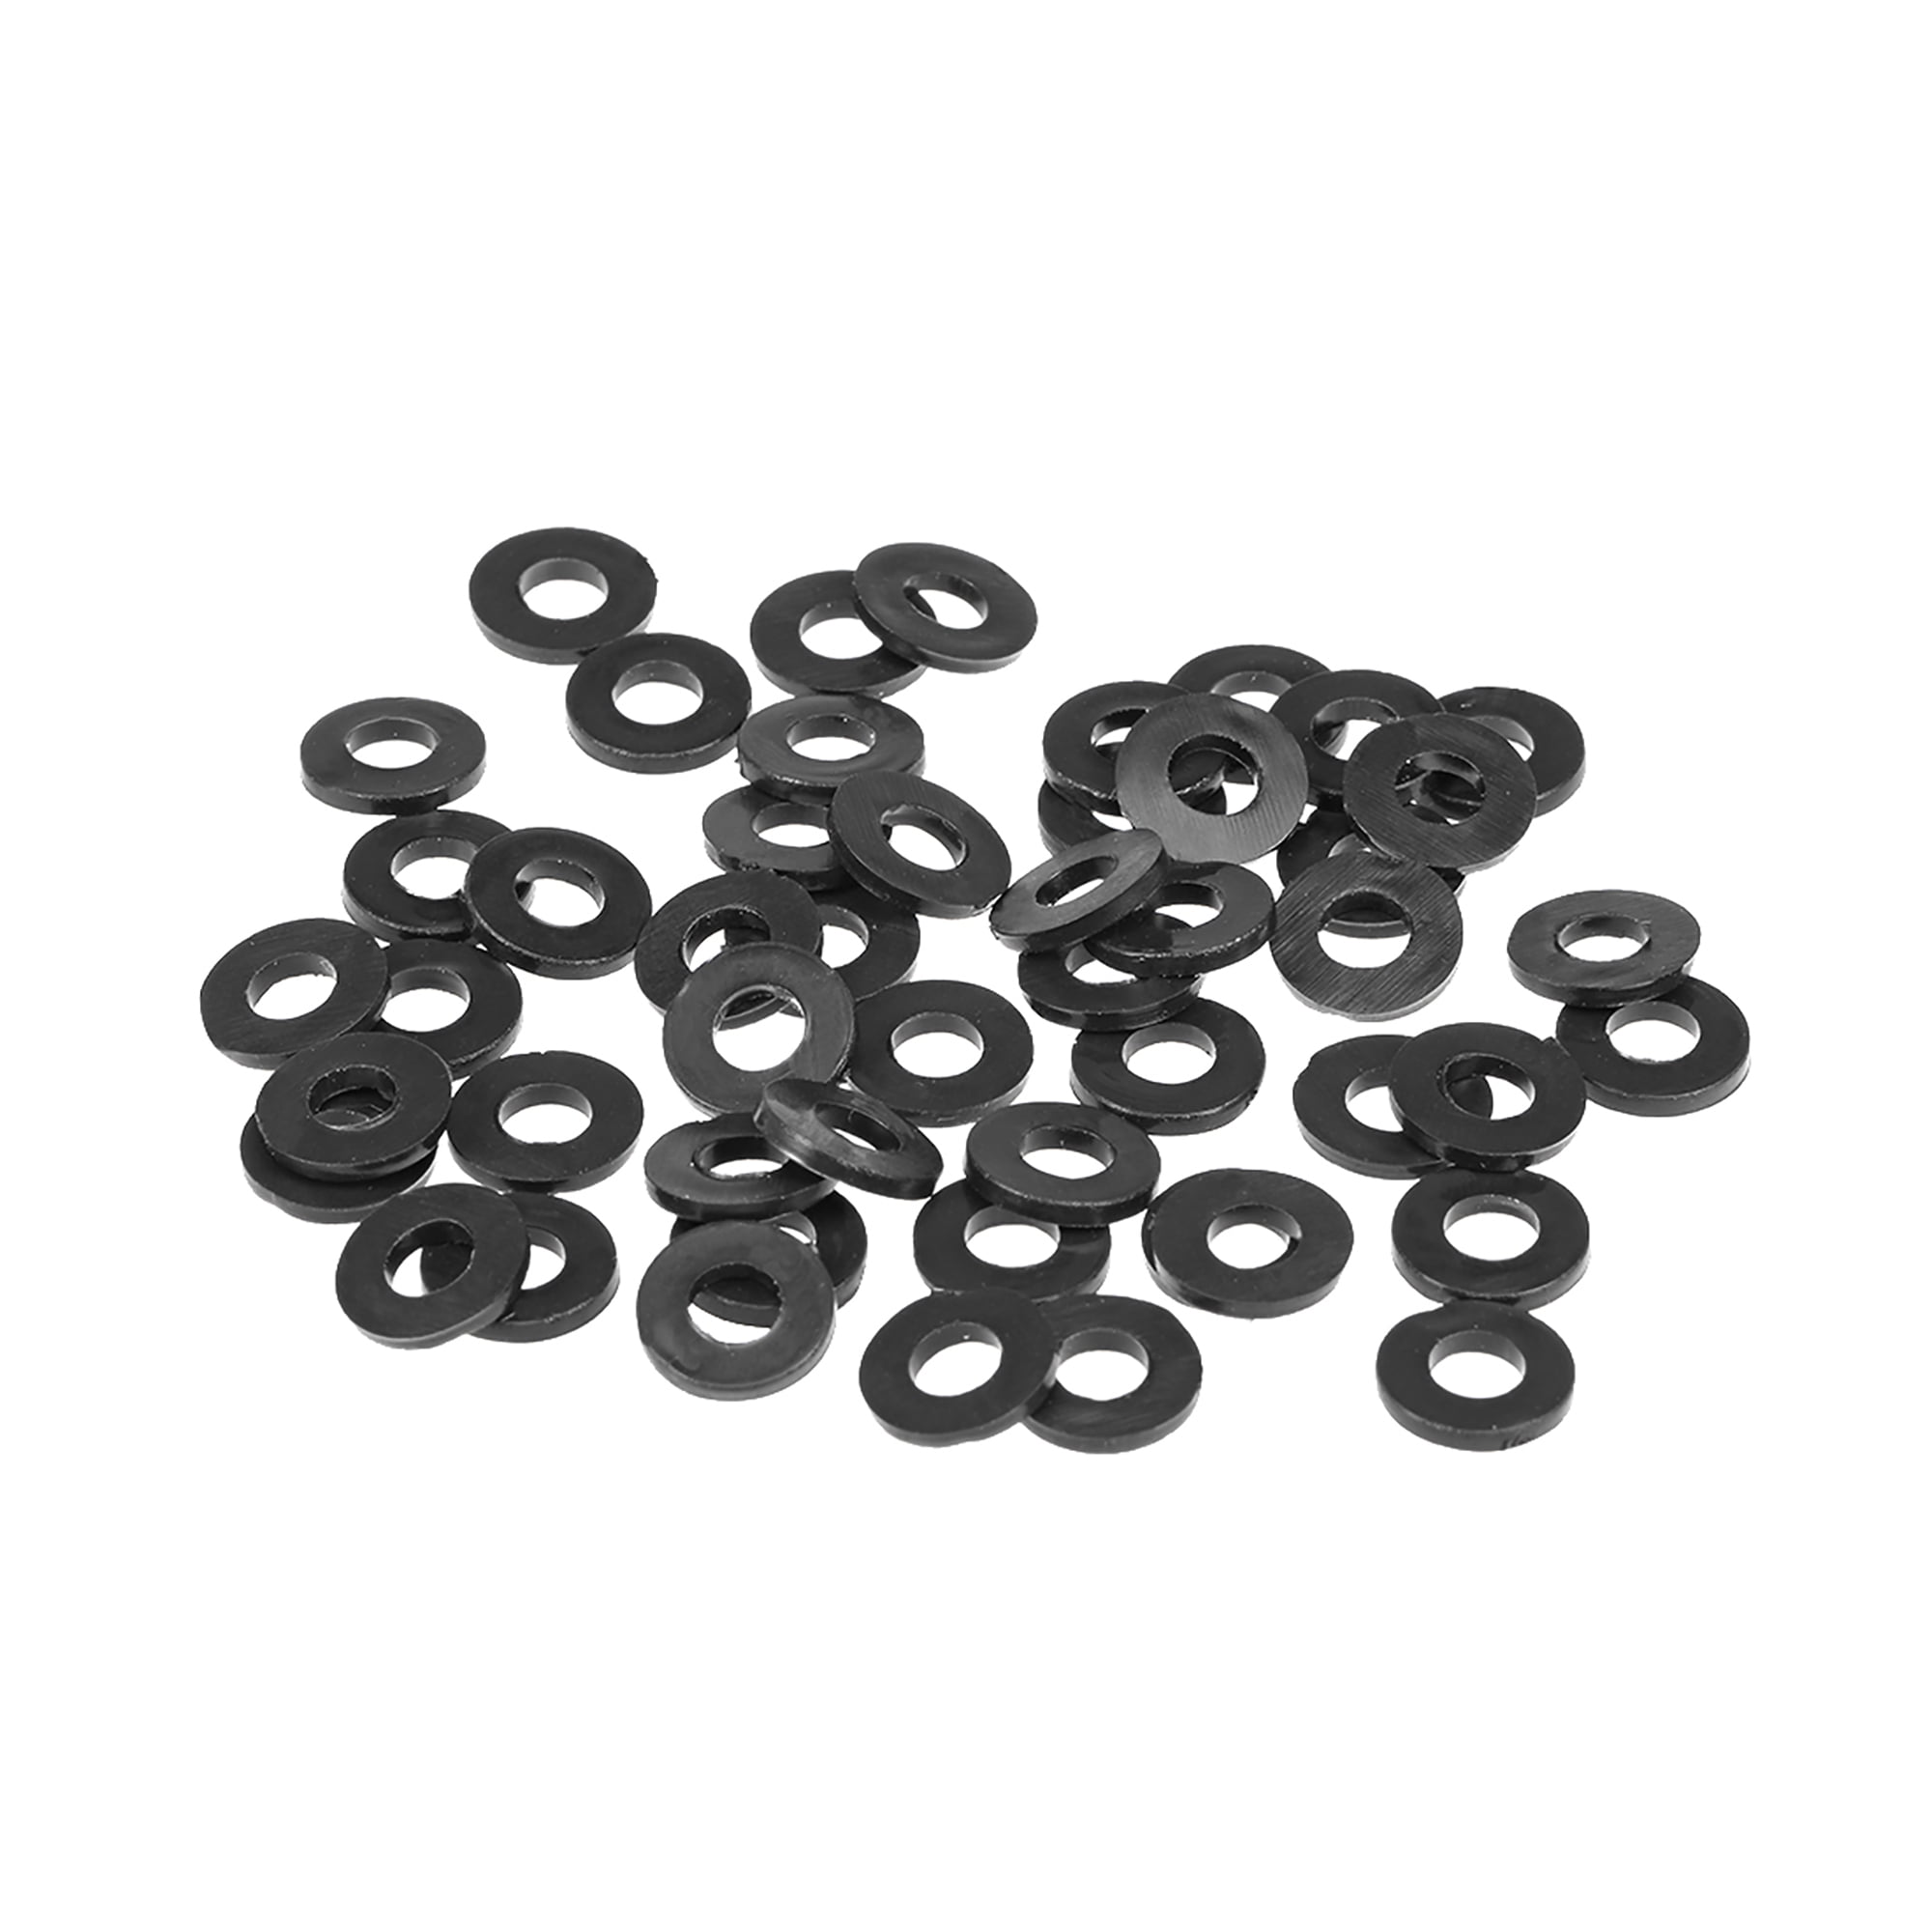 uxcell Silicone Flat Washers 24mm OD 16mm ID 3mm Thickness Sealing Gasket for Faucet Pipe Water Hose White Pack of 40 